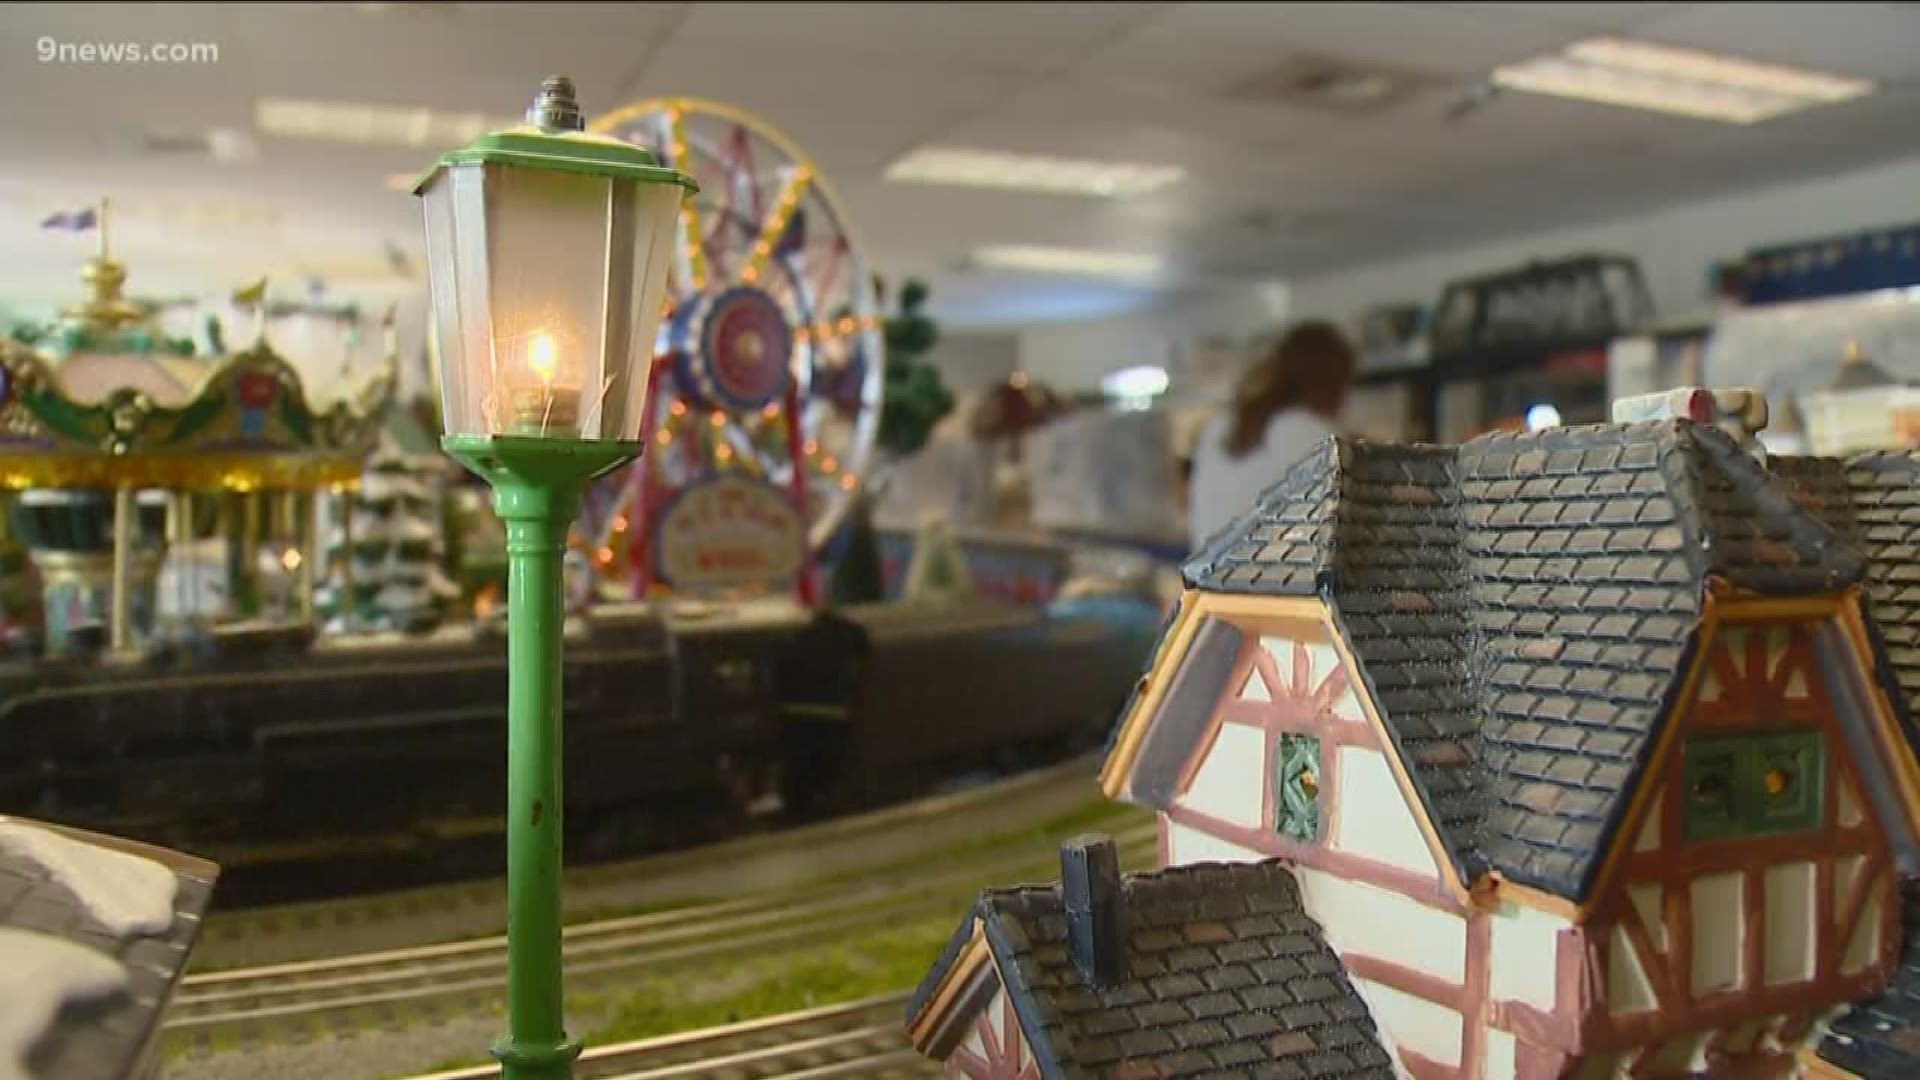 The Moffat Road Railroad Museum has been putting up the seasonal display for more than a decade.